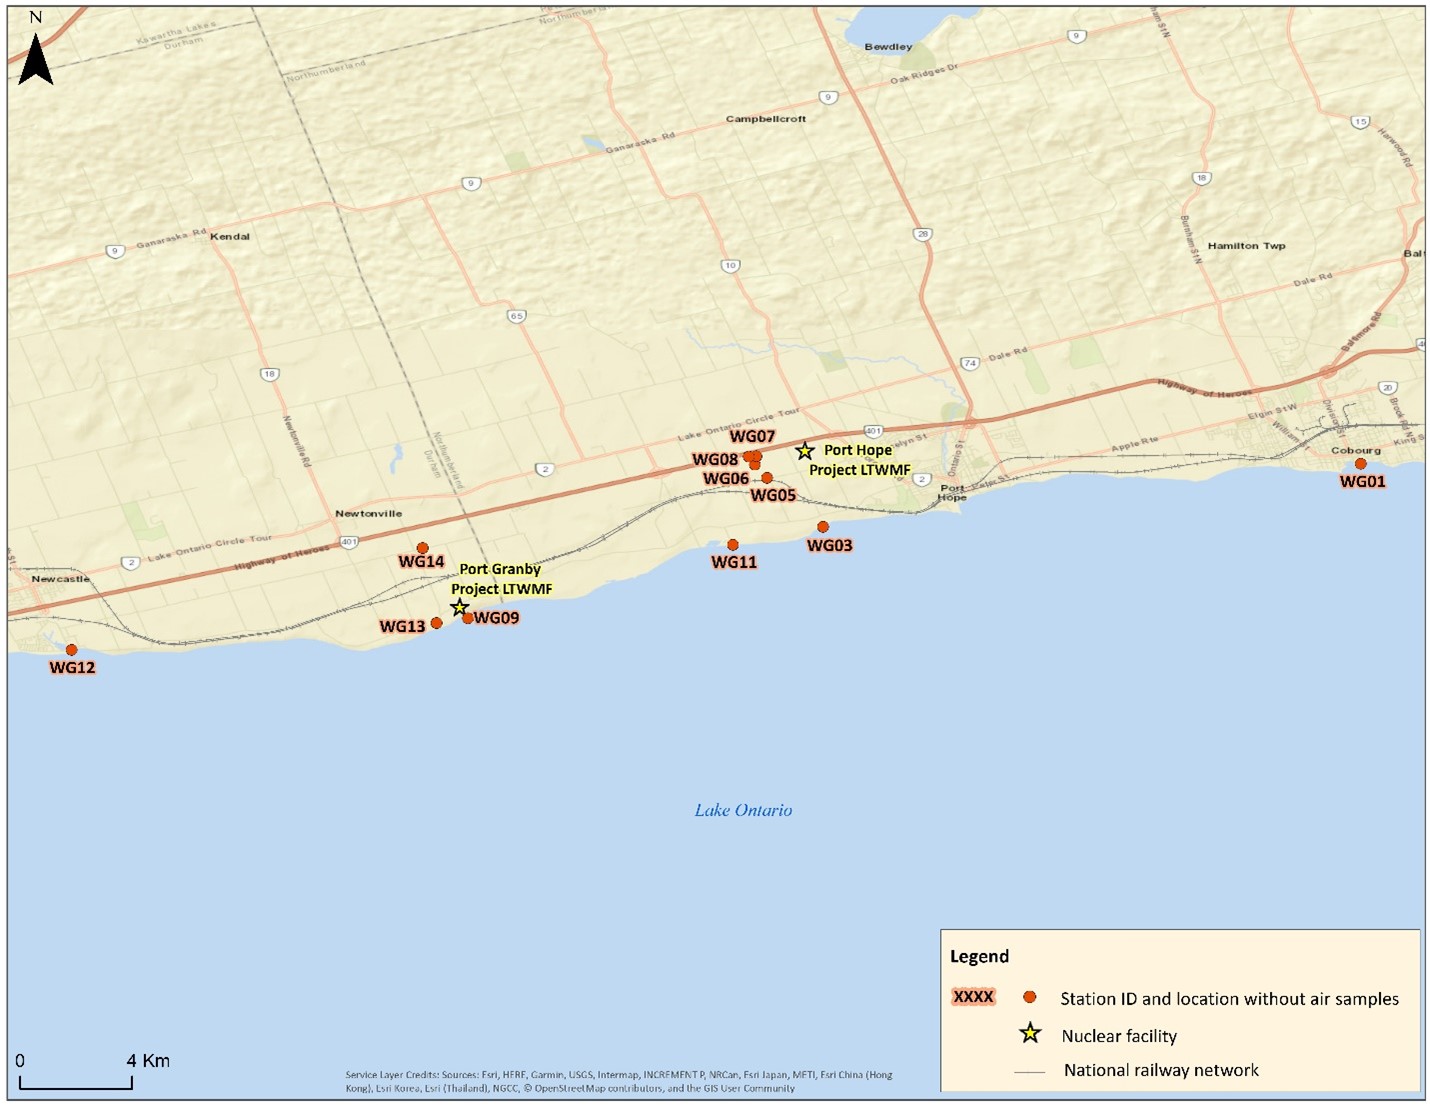 Overview of sample locations for the CNSC’s 2019 Independent Environmental Monitoring Program around the Port Hope Area Initiative sites.